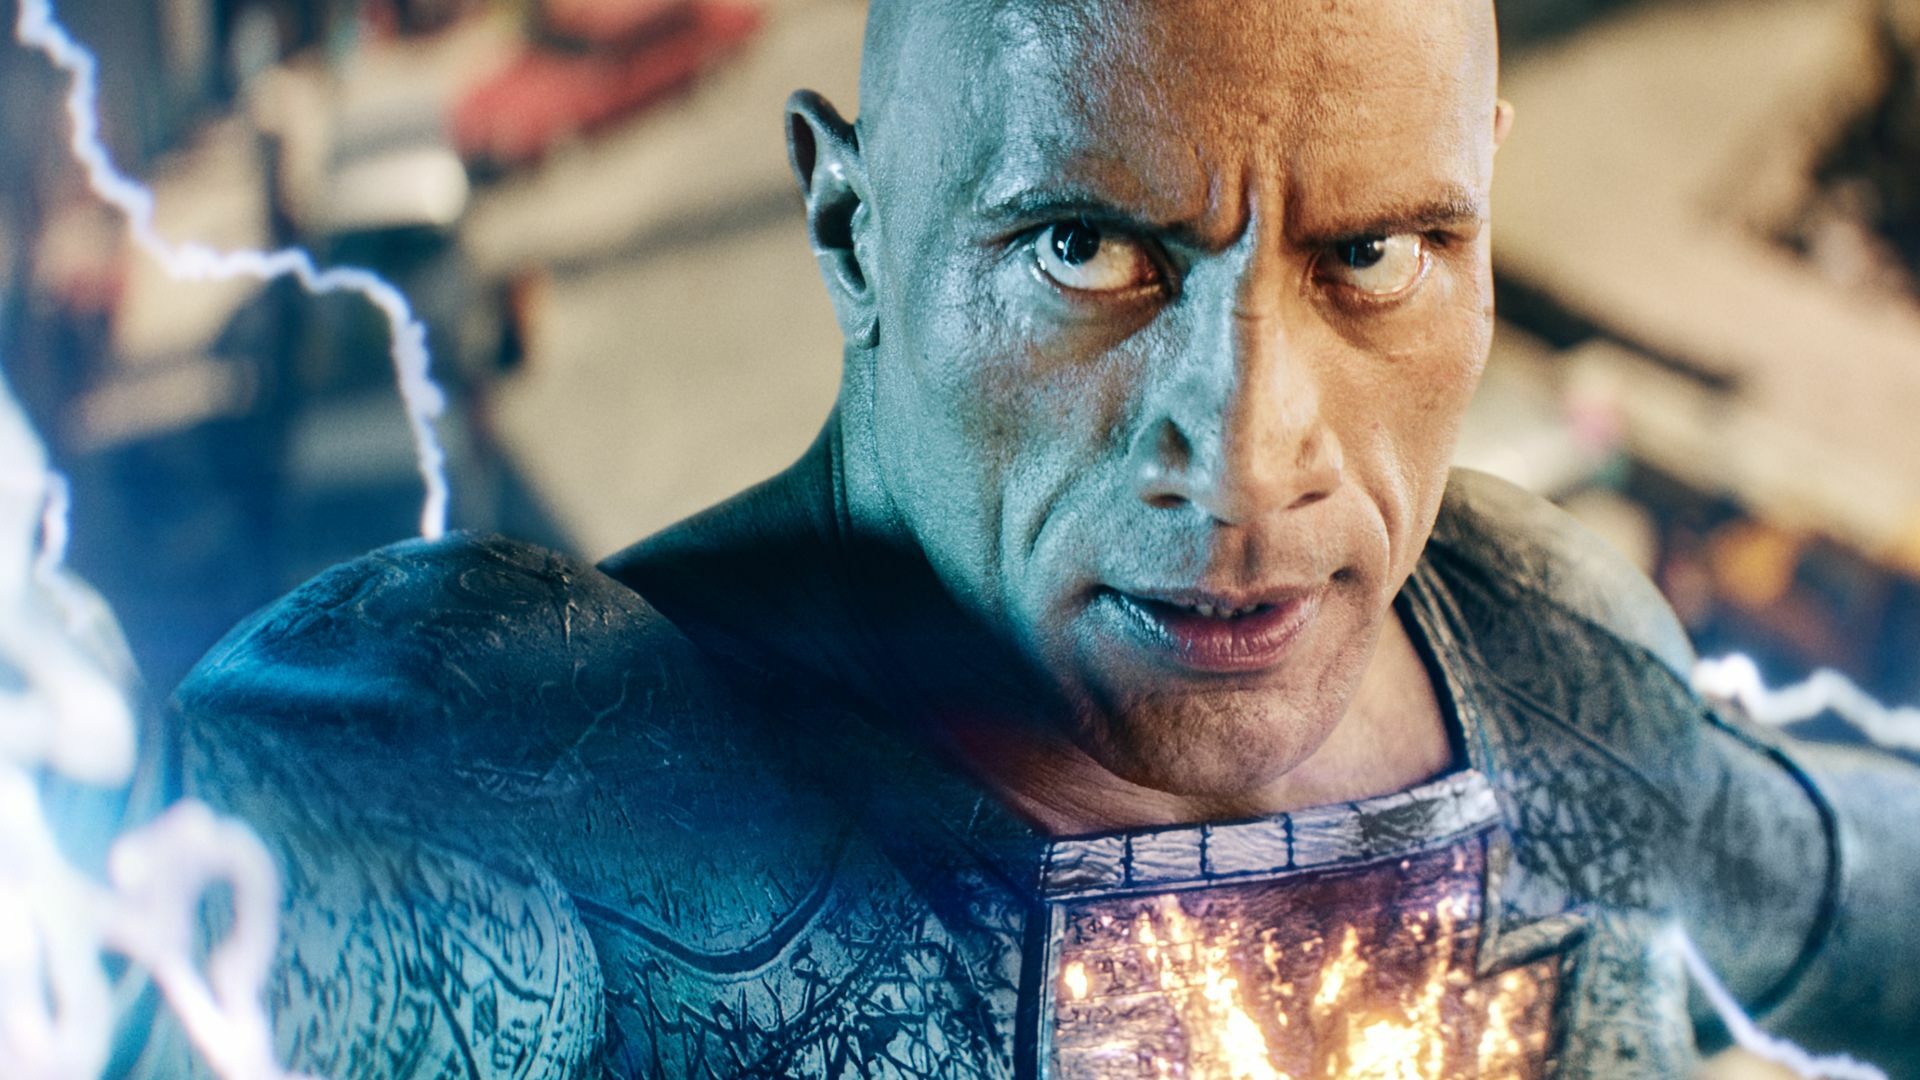 ‘Black Adam’ review: Dwayne Johnson’s star power squandered in another muddled DCEU drama